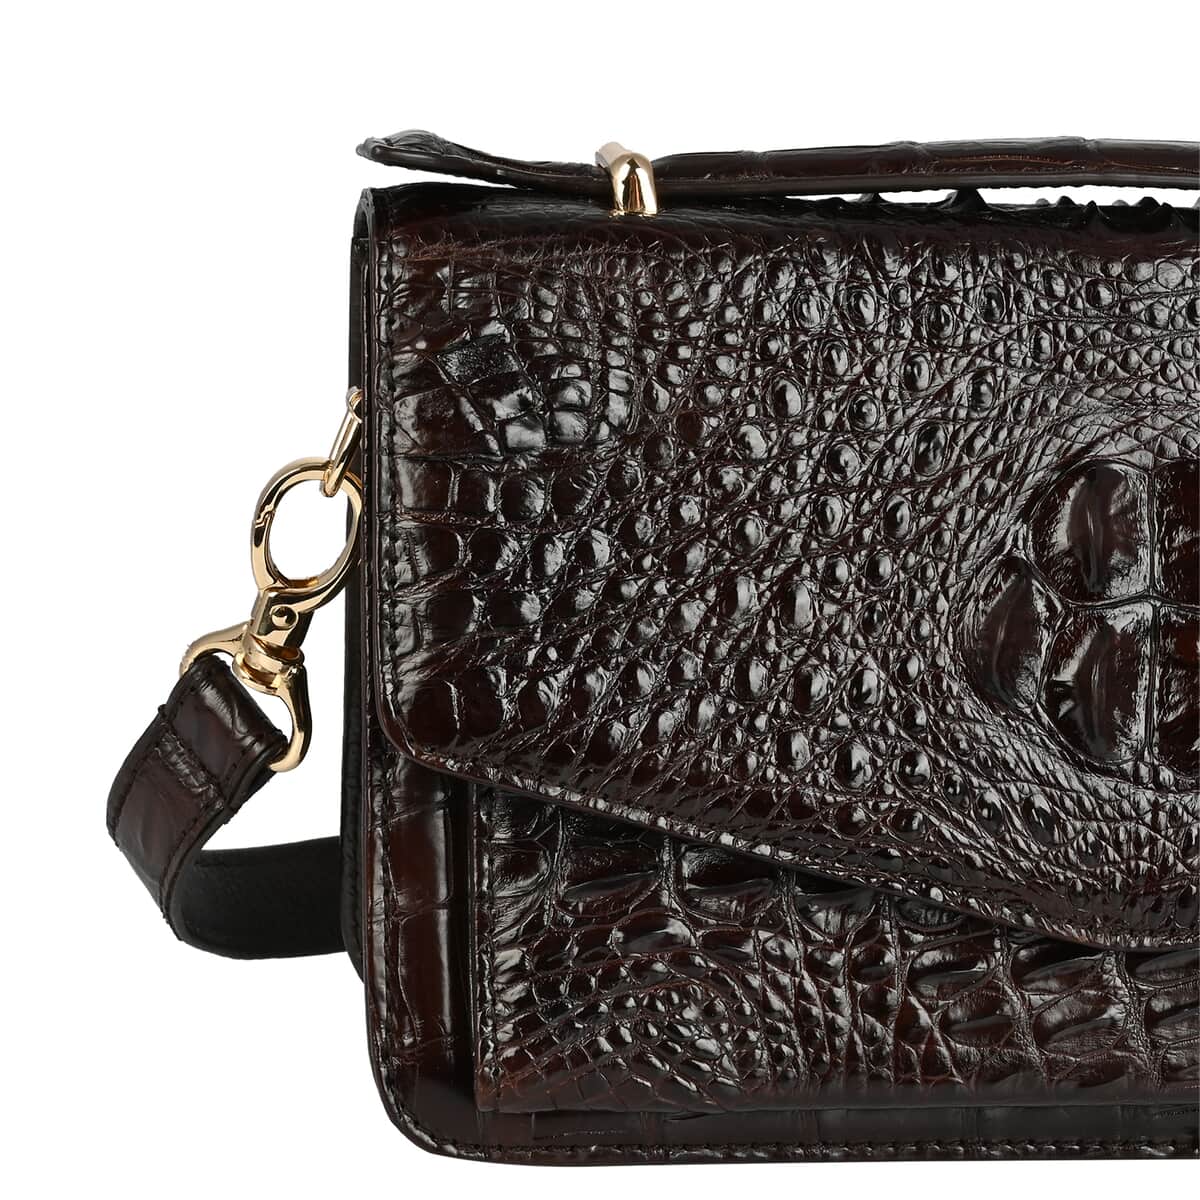 THE PELLE Dark Chocolate Genuine Crocodile Leather Shell Along with Cow Leather Lining Crossbody Bag (8.66"x3.2"x5.5") with Shoulder Strap image number 2